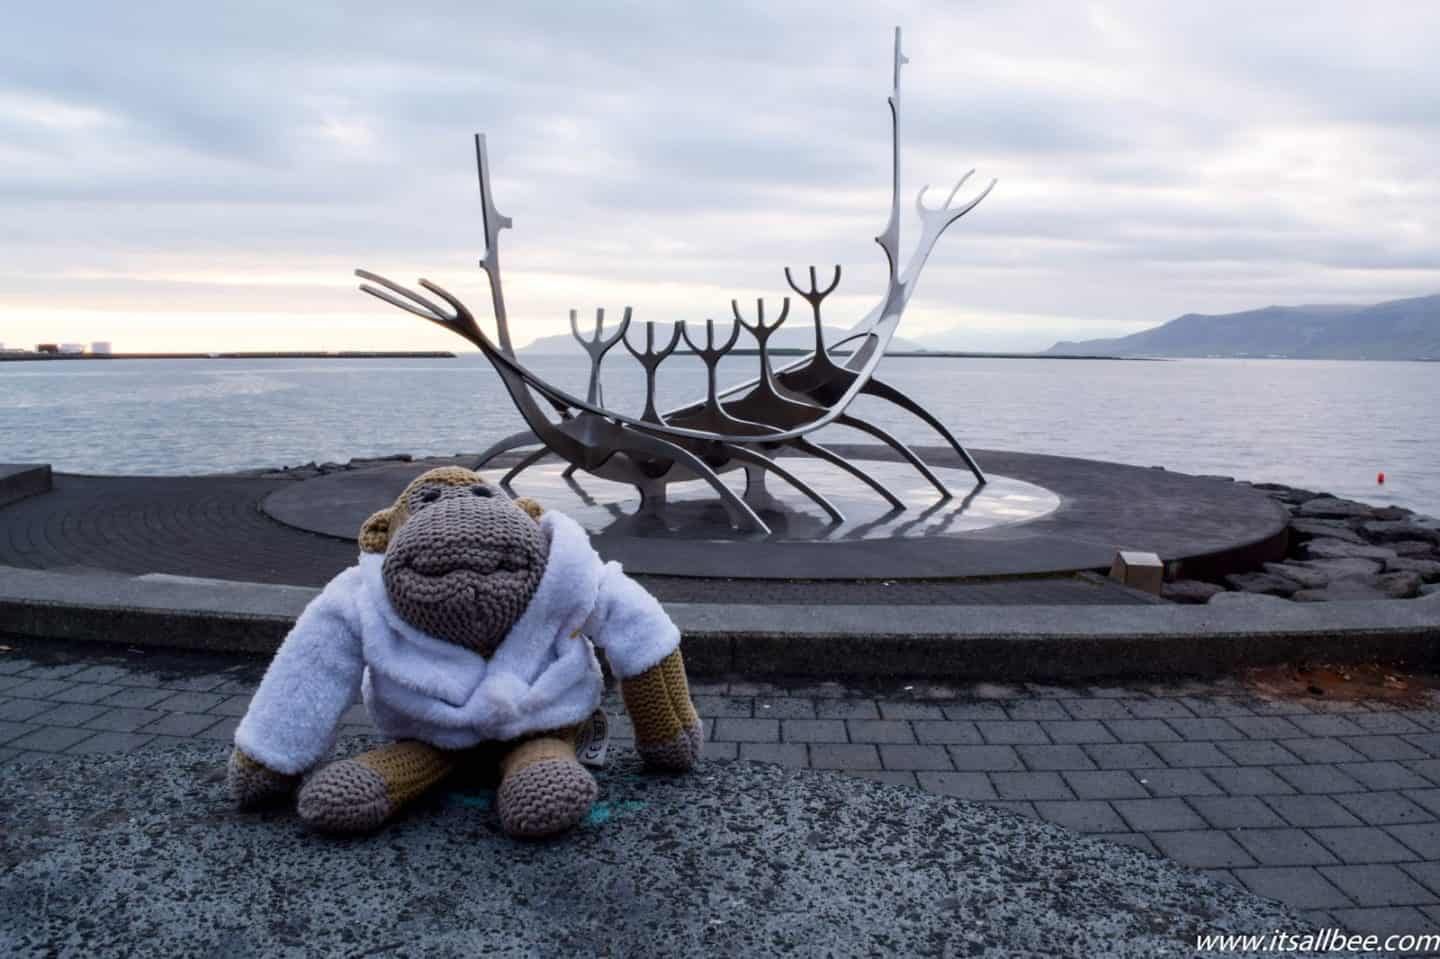 Things to do in Iceland - Sun Voyager